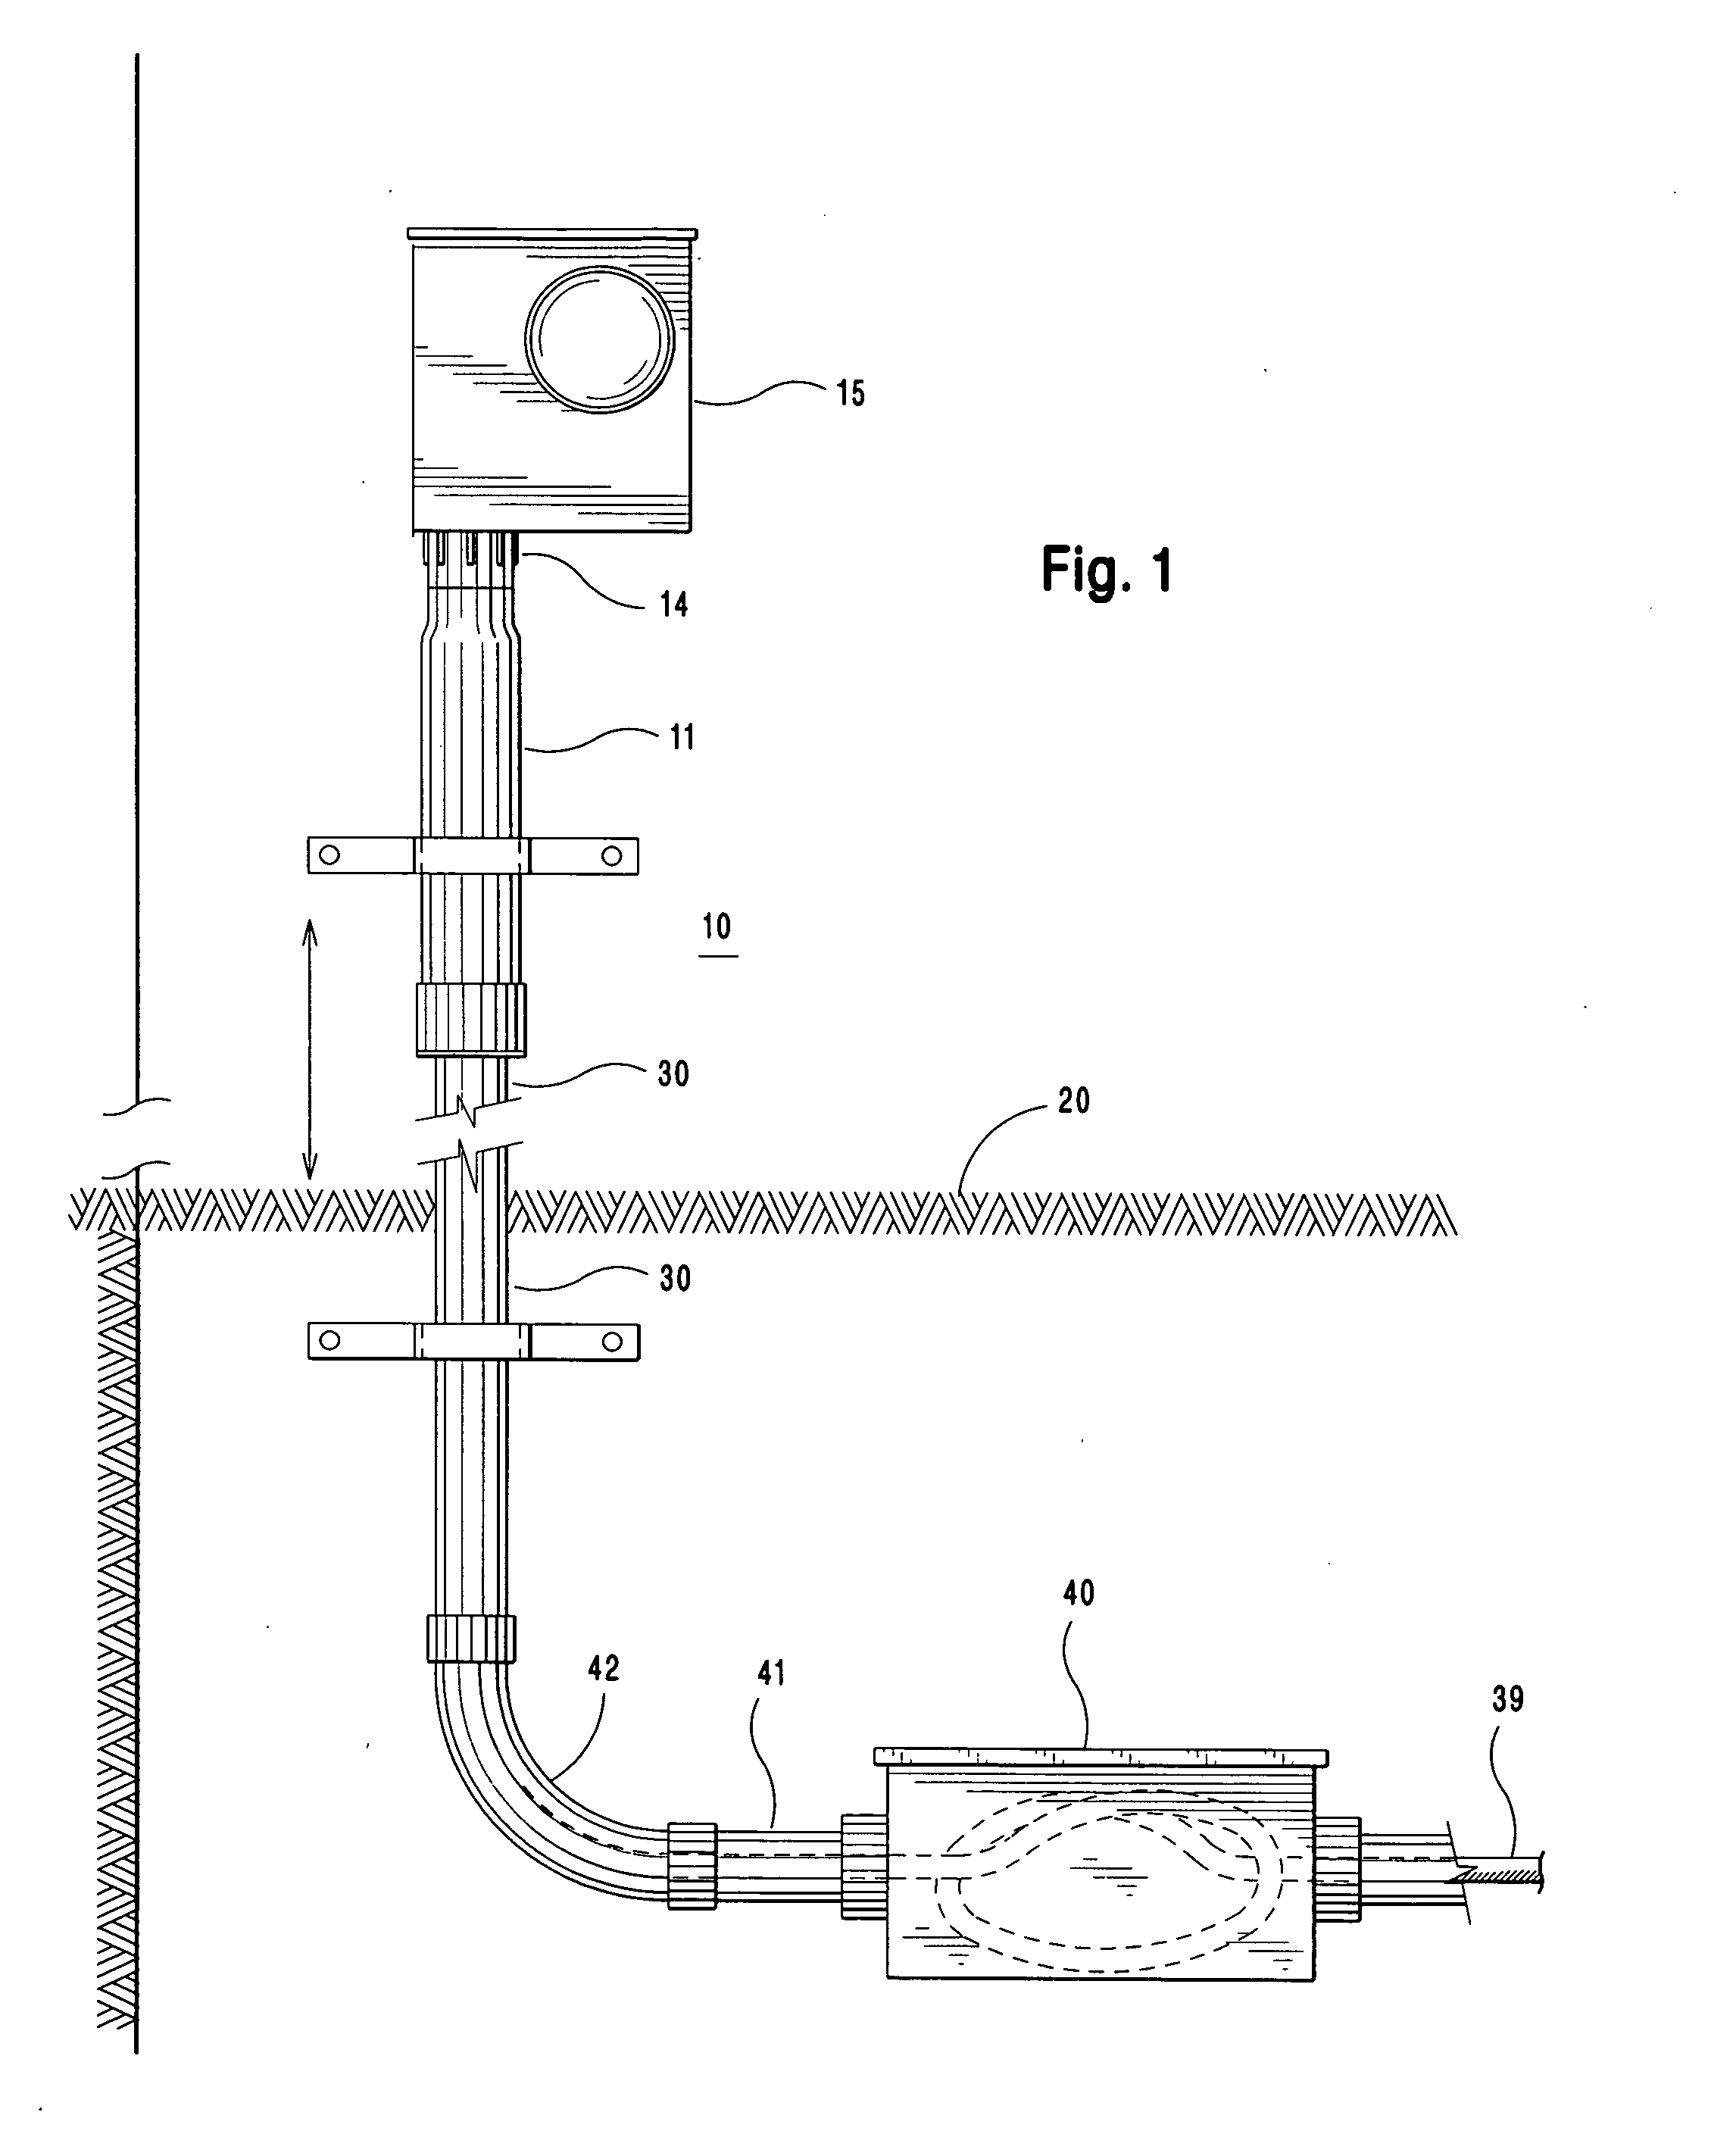 Slack cable arrangement for underground electric service conduit connected to service boxes on the sides of buildings